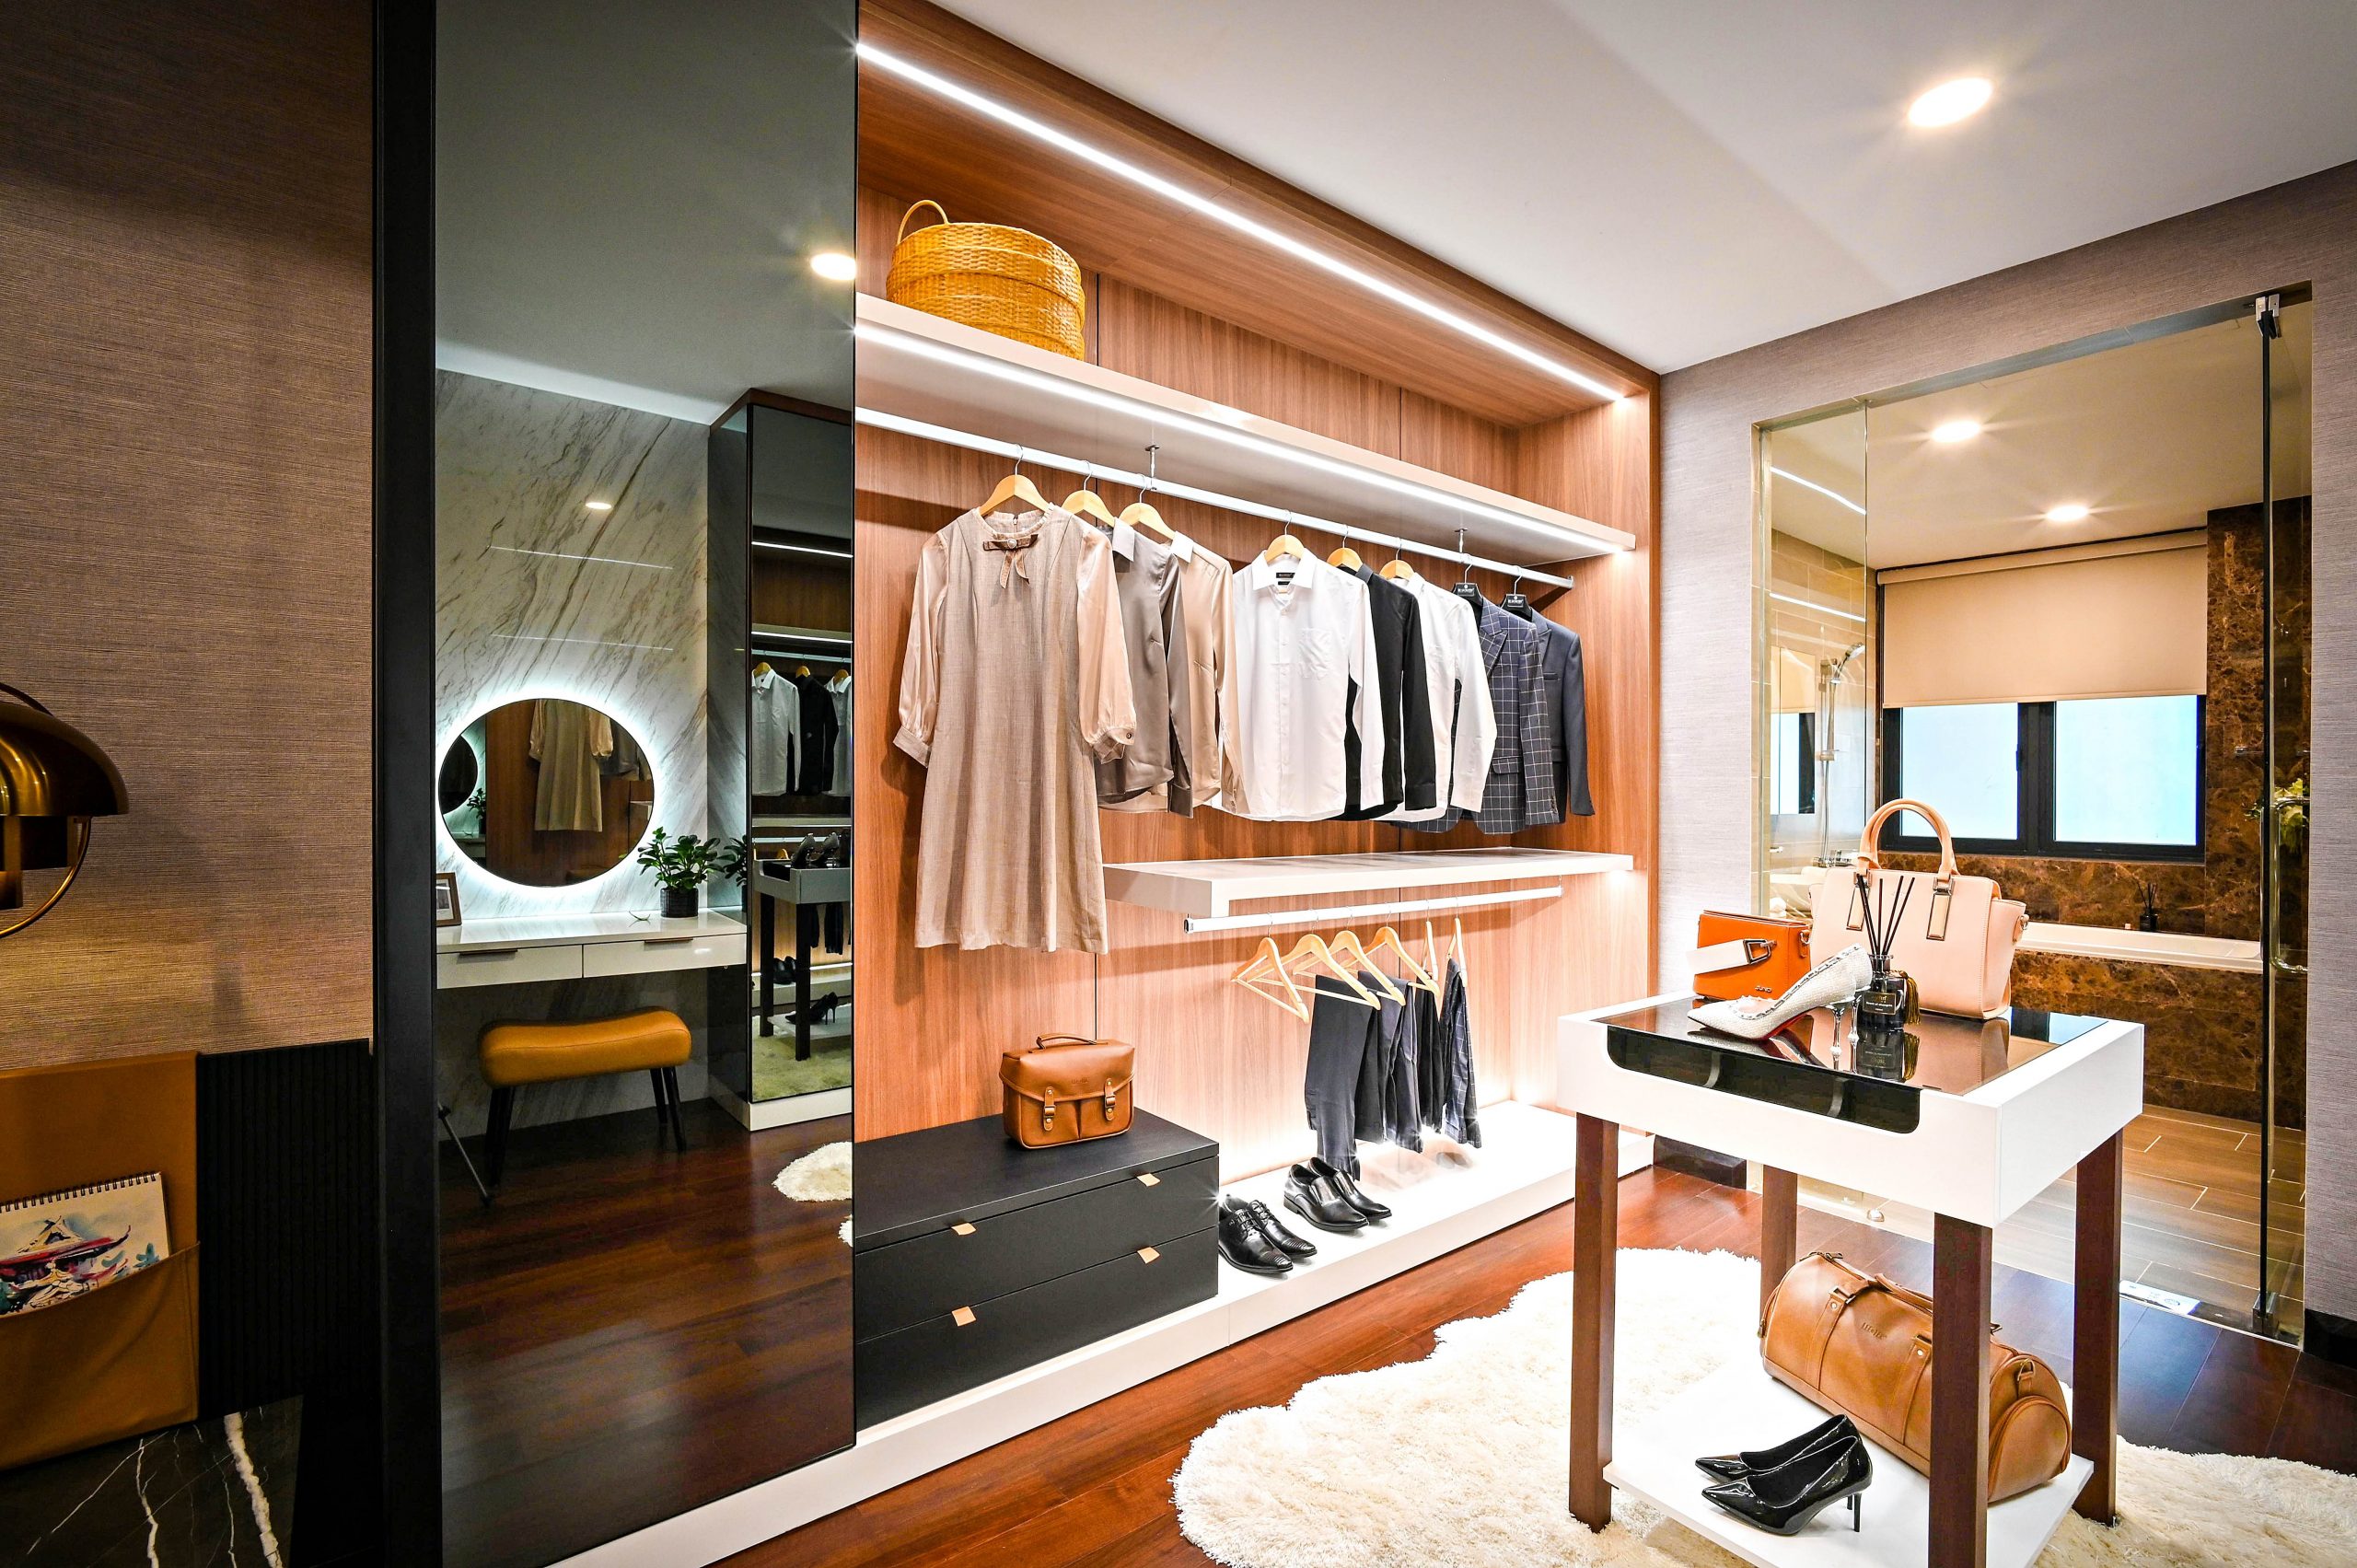 5 Things You Need to Create an Amazing Dream Closet or Glam Room